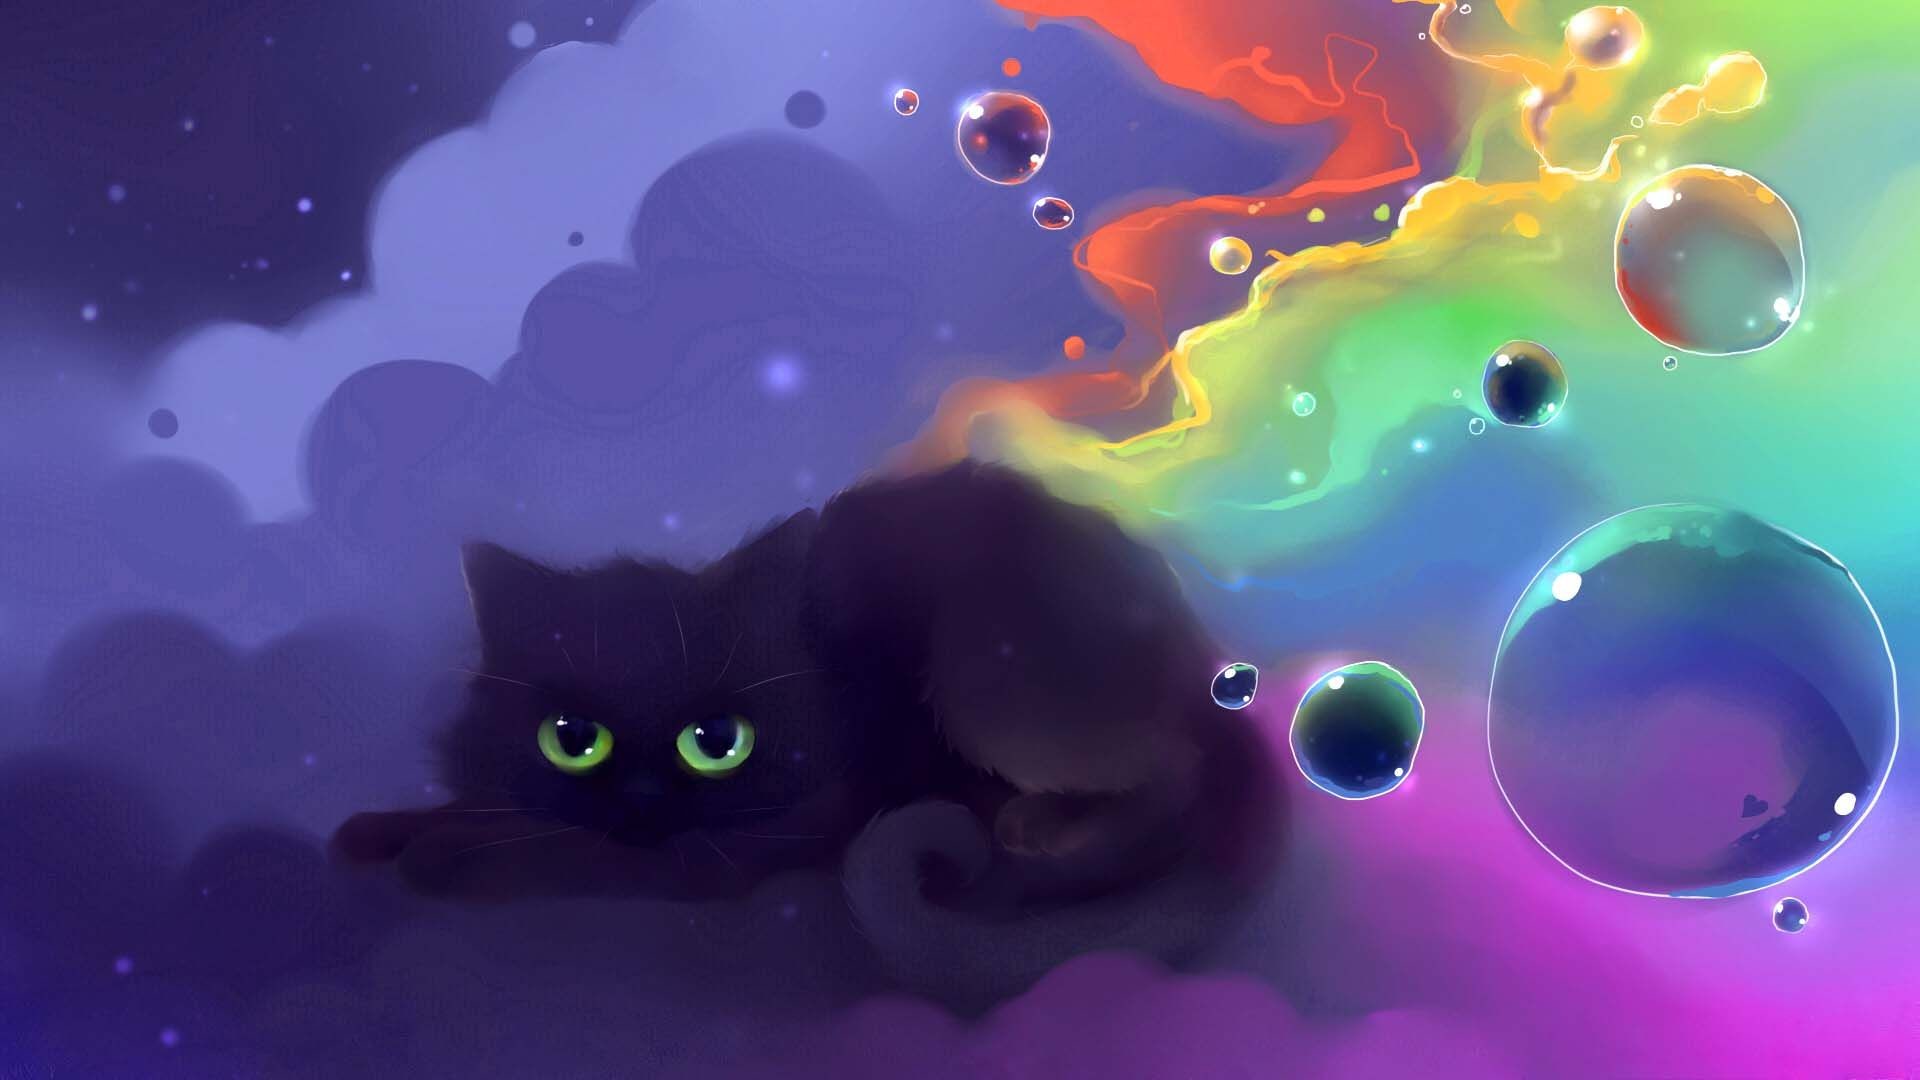 1920x1080 Katzen images Kitty Cat HD wallpaper and background photos